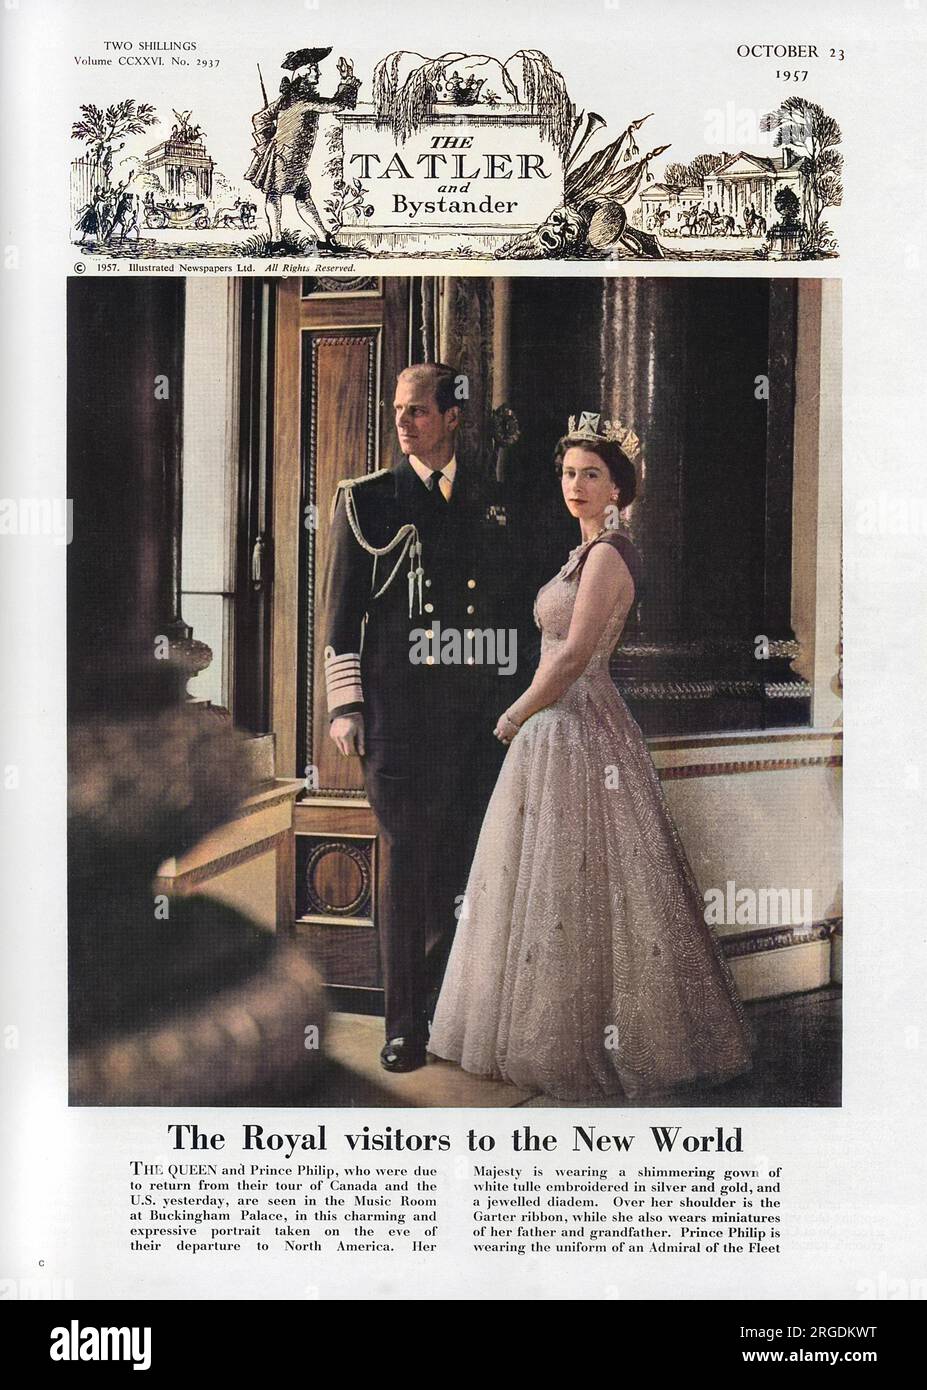 The Queen and Prince Philip in the Music Room at Buckingham Palace, taken on the eve of their departure to North America. The Queen wears a shimmering gown of white tulle embroidered in silver and gold, and a jewelled diadem. Over her shoulder is the Garter ribbon, while she also wears miniatures of her father and grandfather. Prince Philip is wearing the uniform of an Admiral of the Fleet. Stock Photo